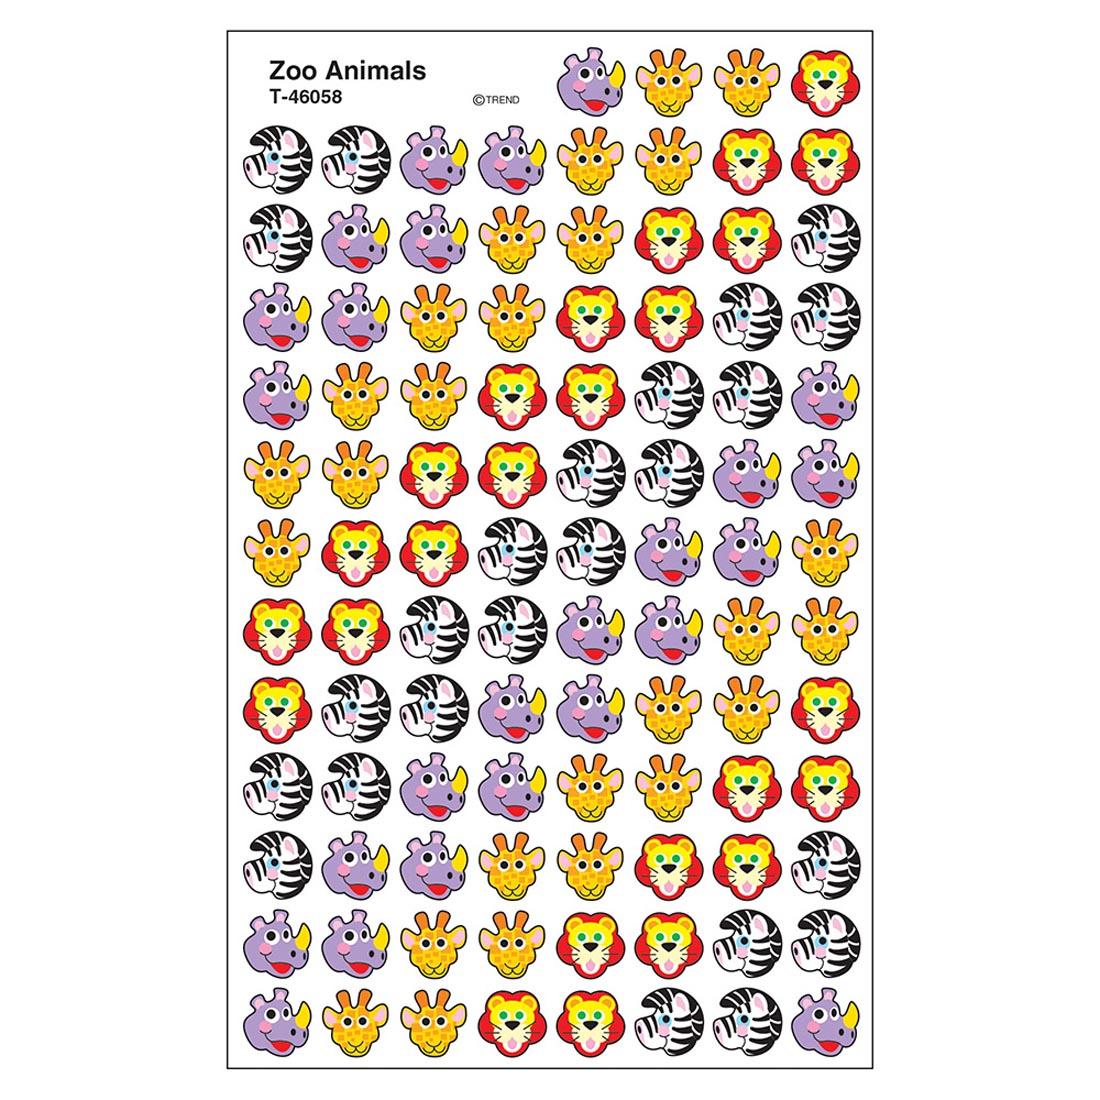 TREND Zoo Animals superShapes Stickers